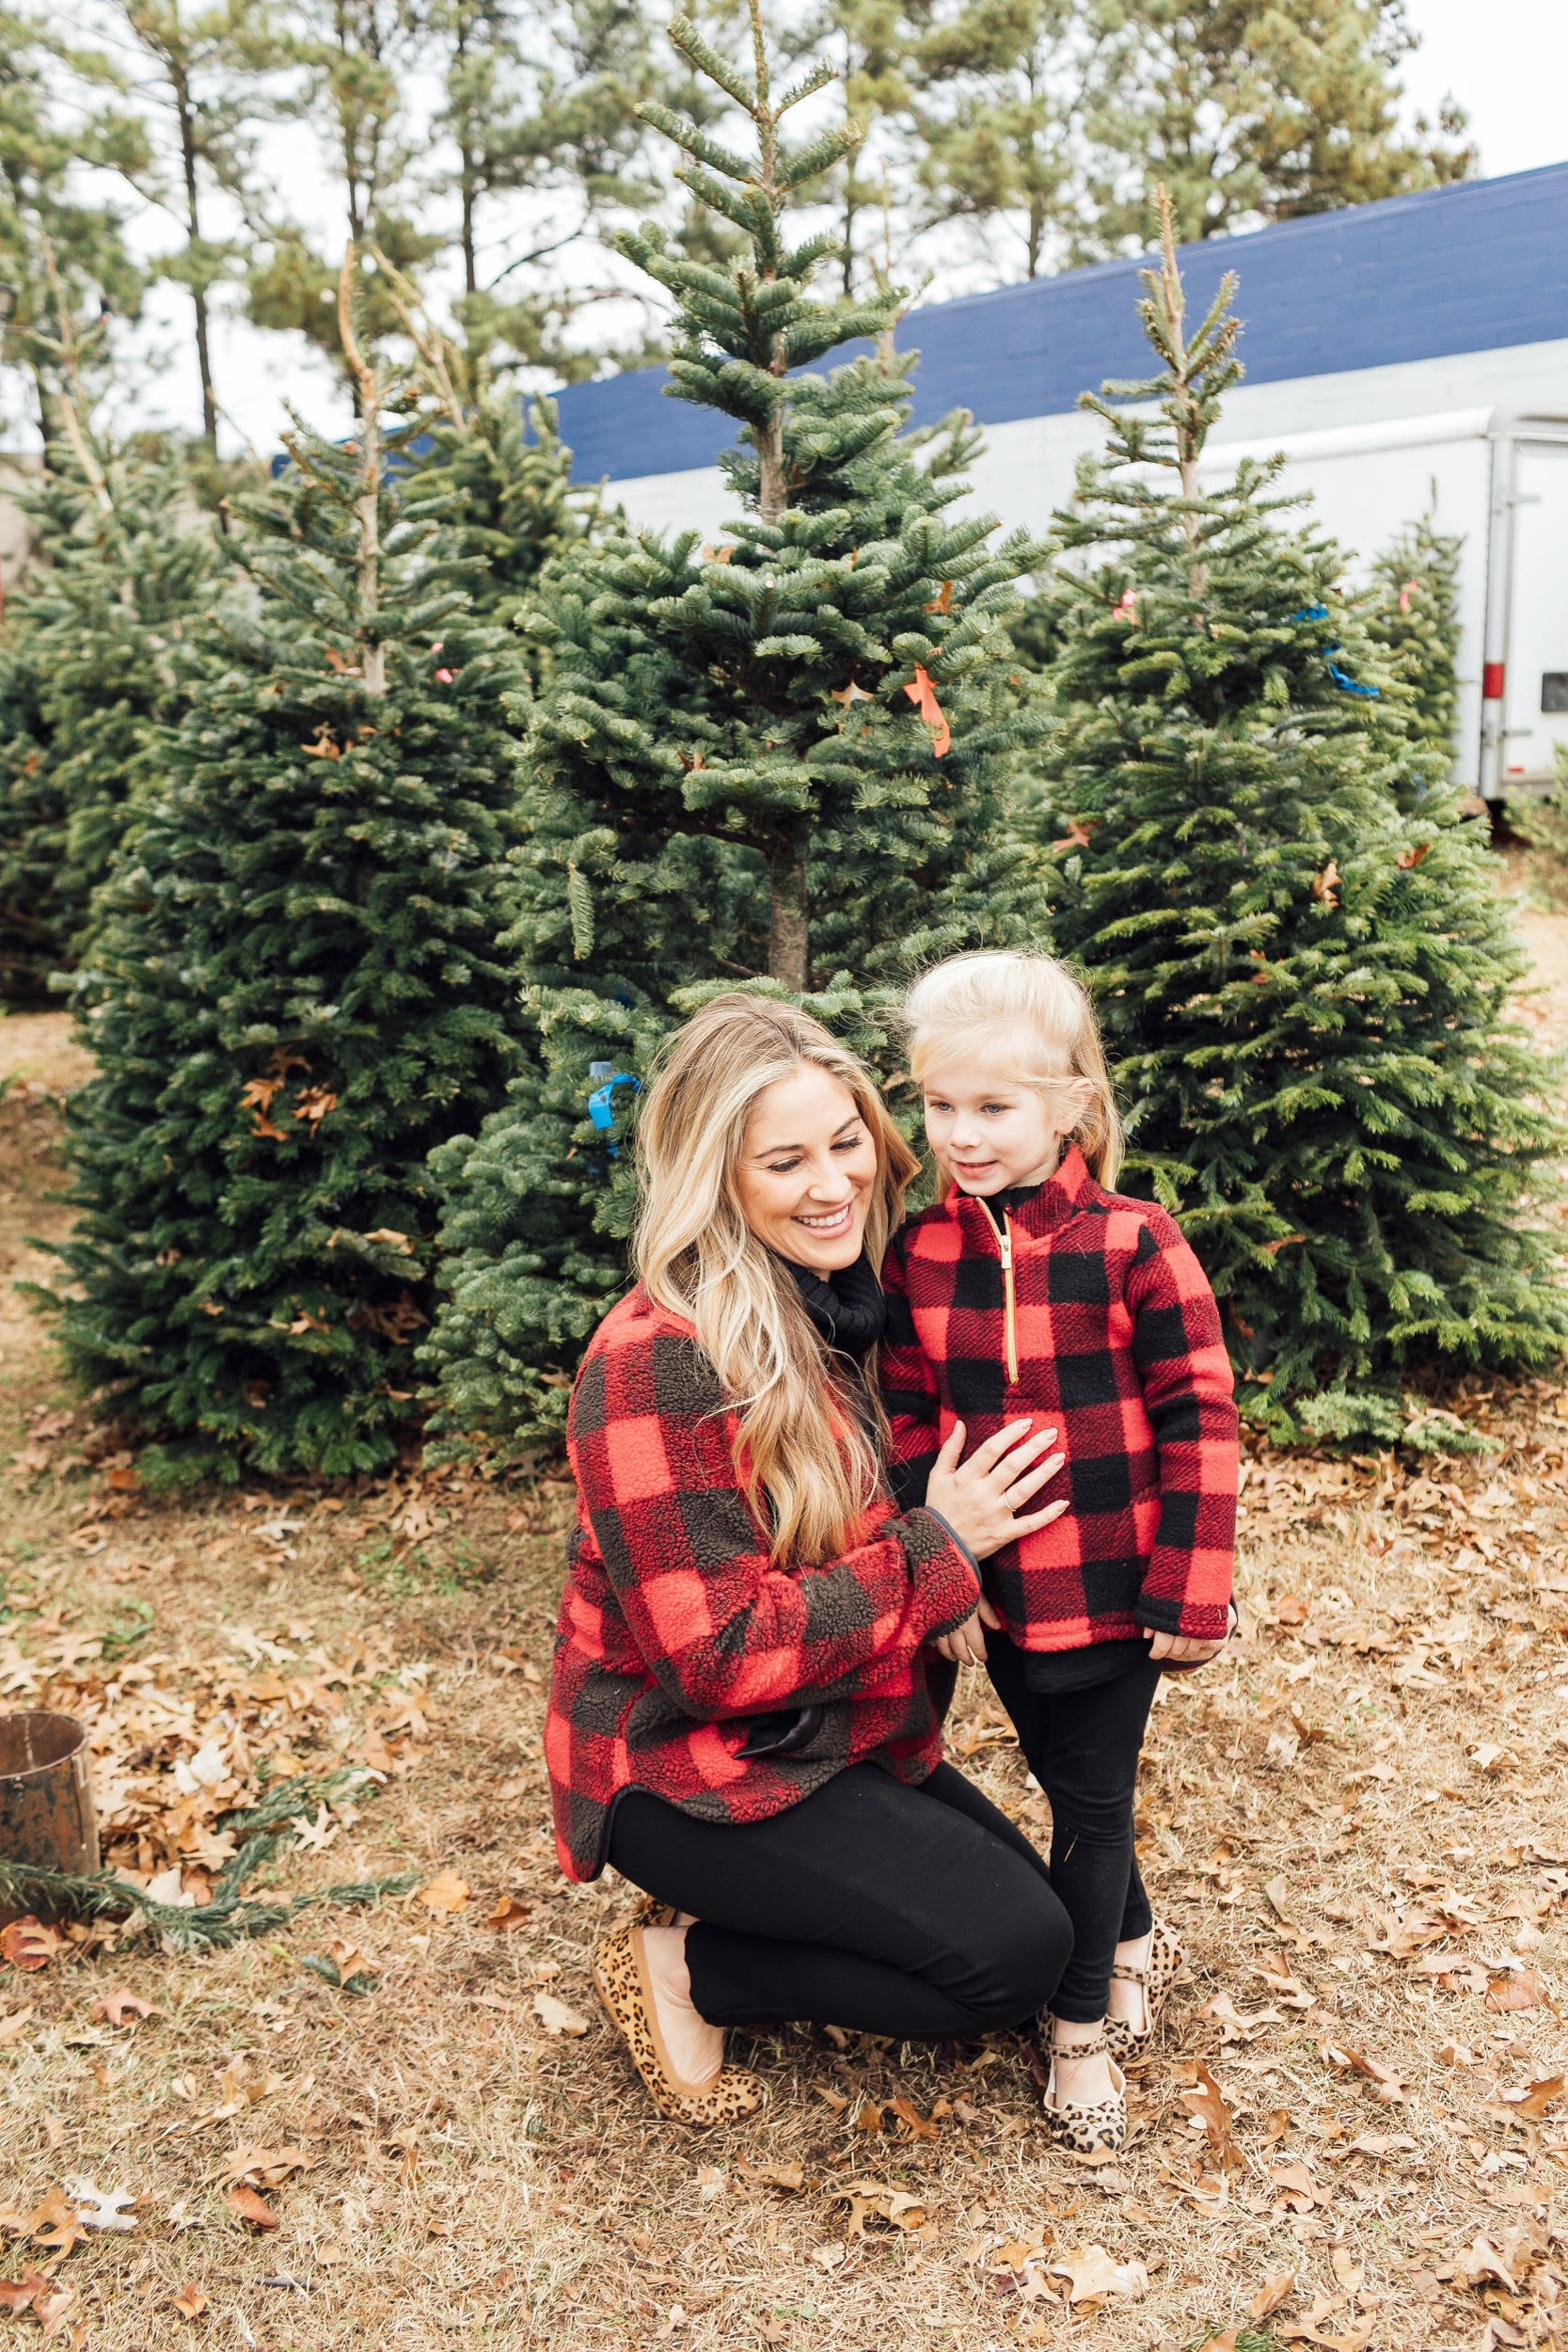 Merry Christmas Wishes featured by top US lifestyle blog, Walking in Memphis in High Heels: image of a mom and daughter wearing red plaid jackets, black jeans and gold shoes